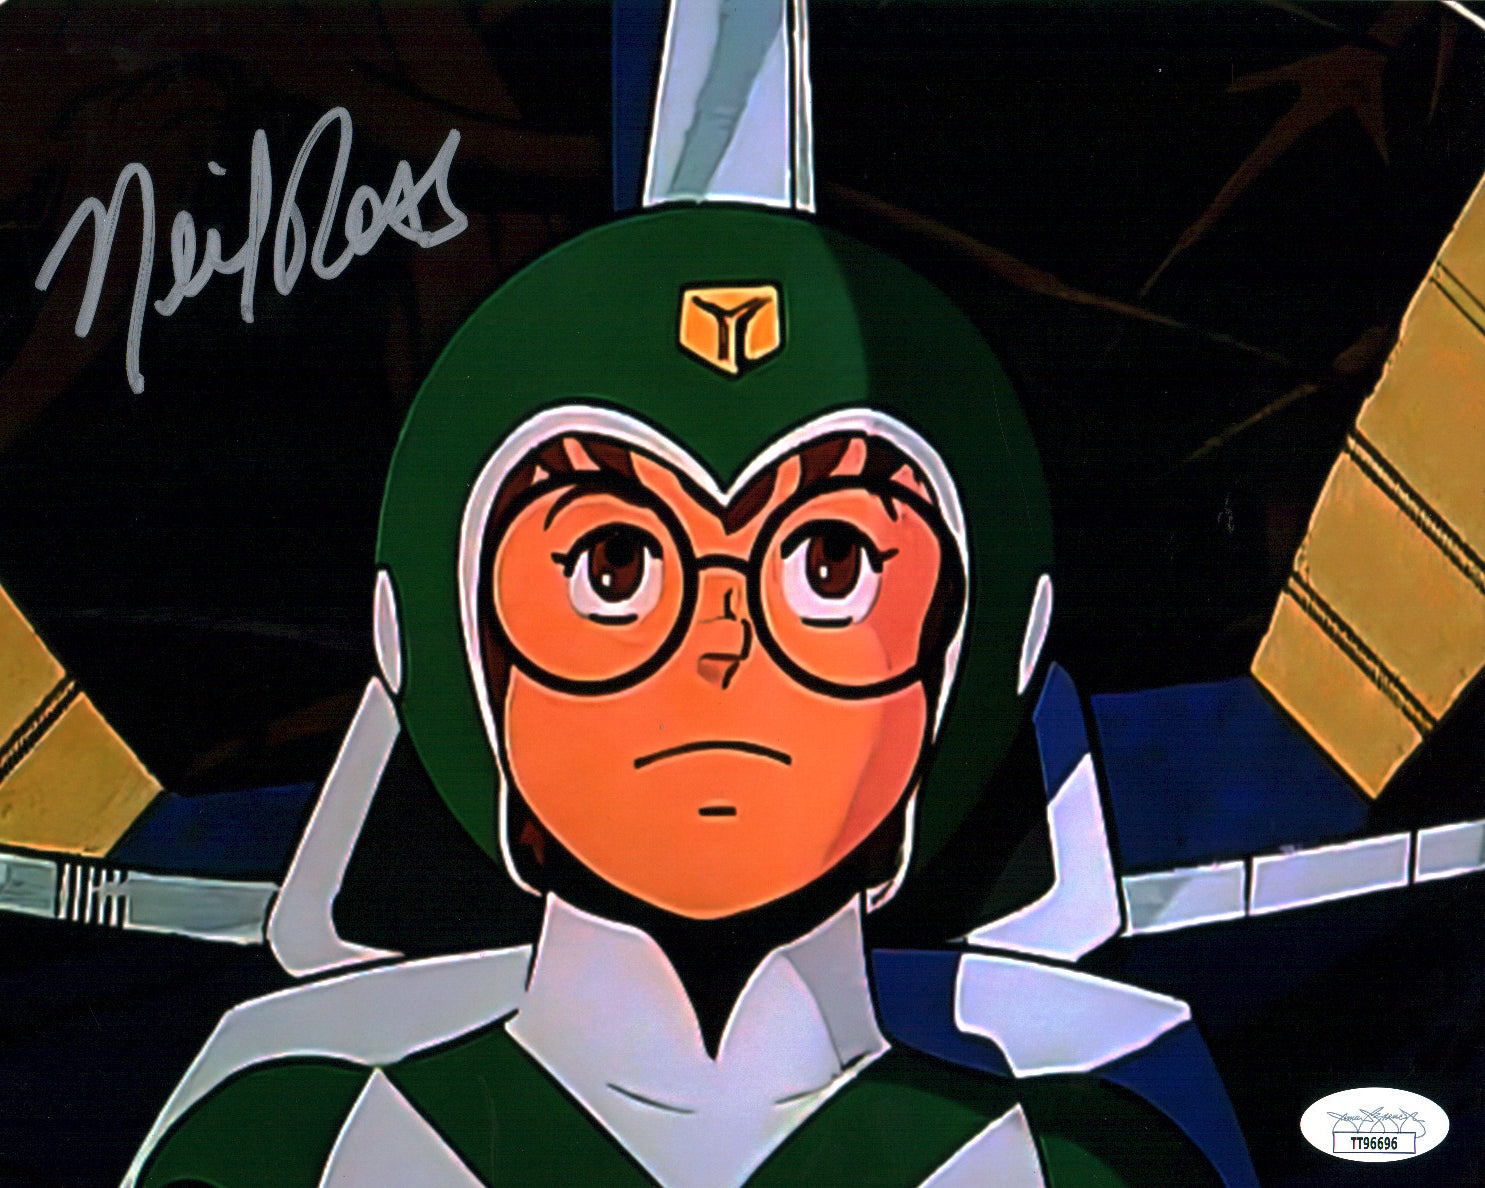 Neil Ross Voltron: Defender of the Universe 8x10 Signed Photo JSA Certified Autograph